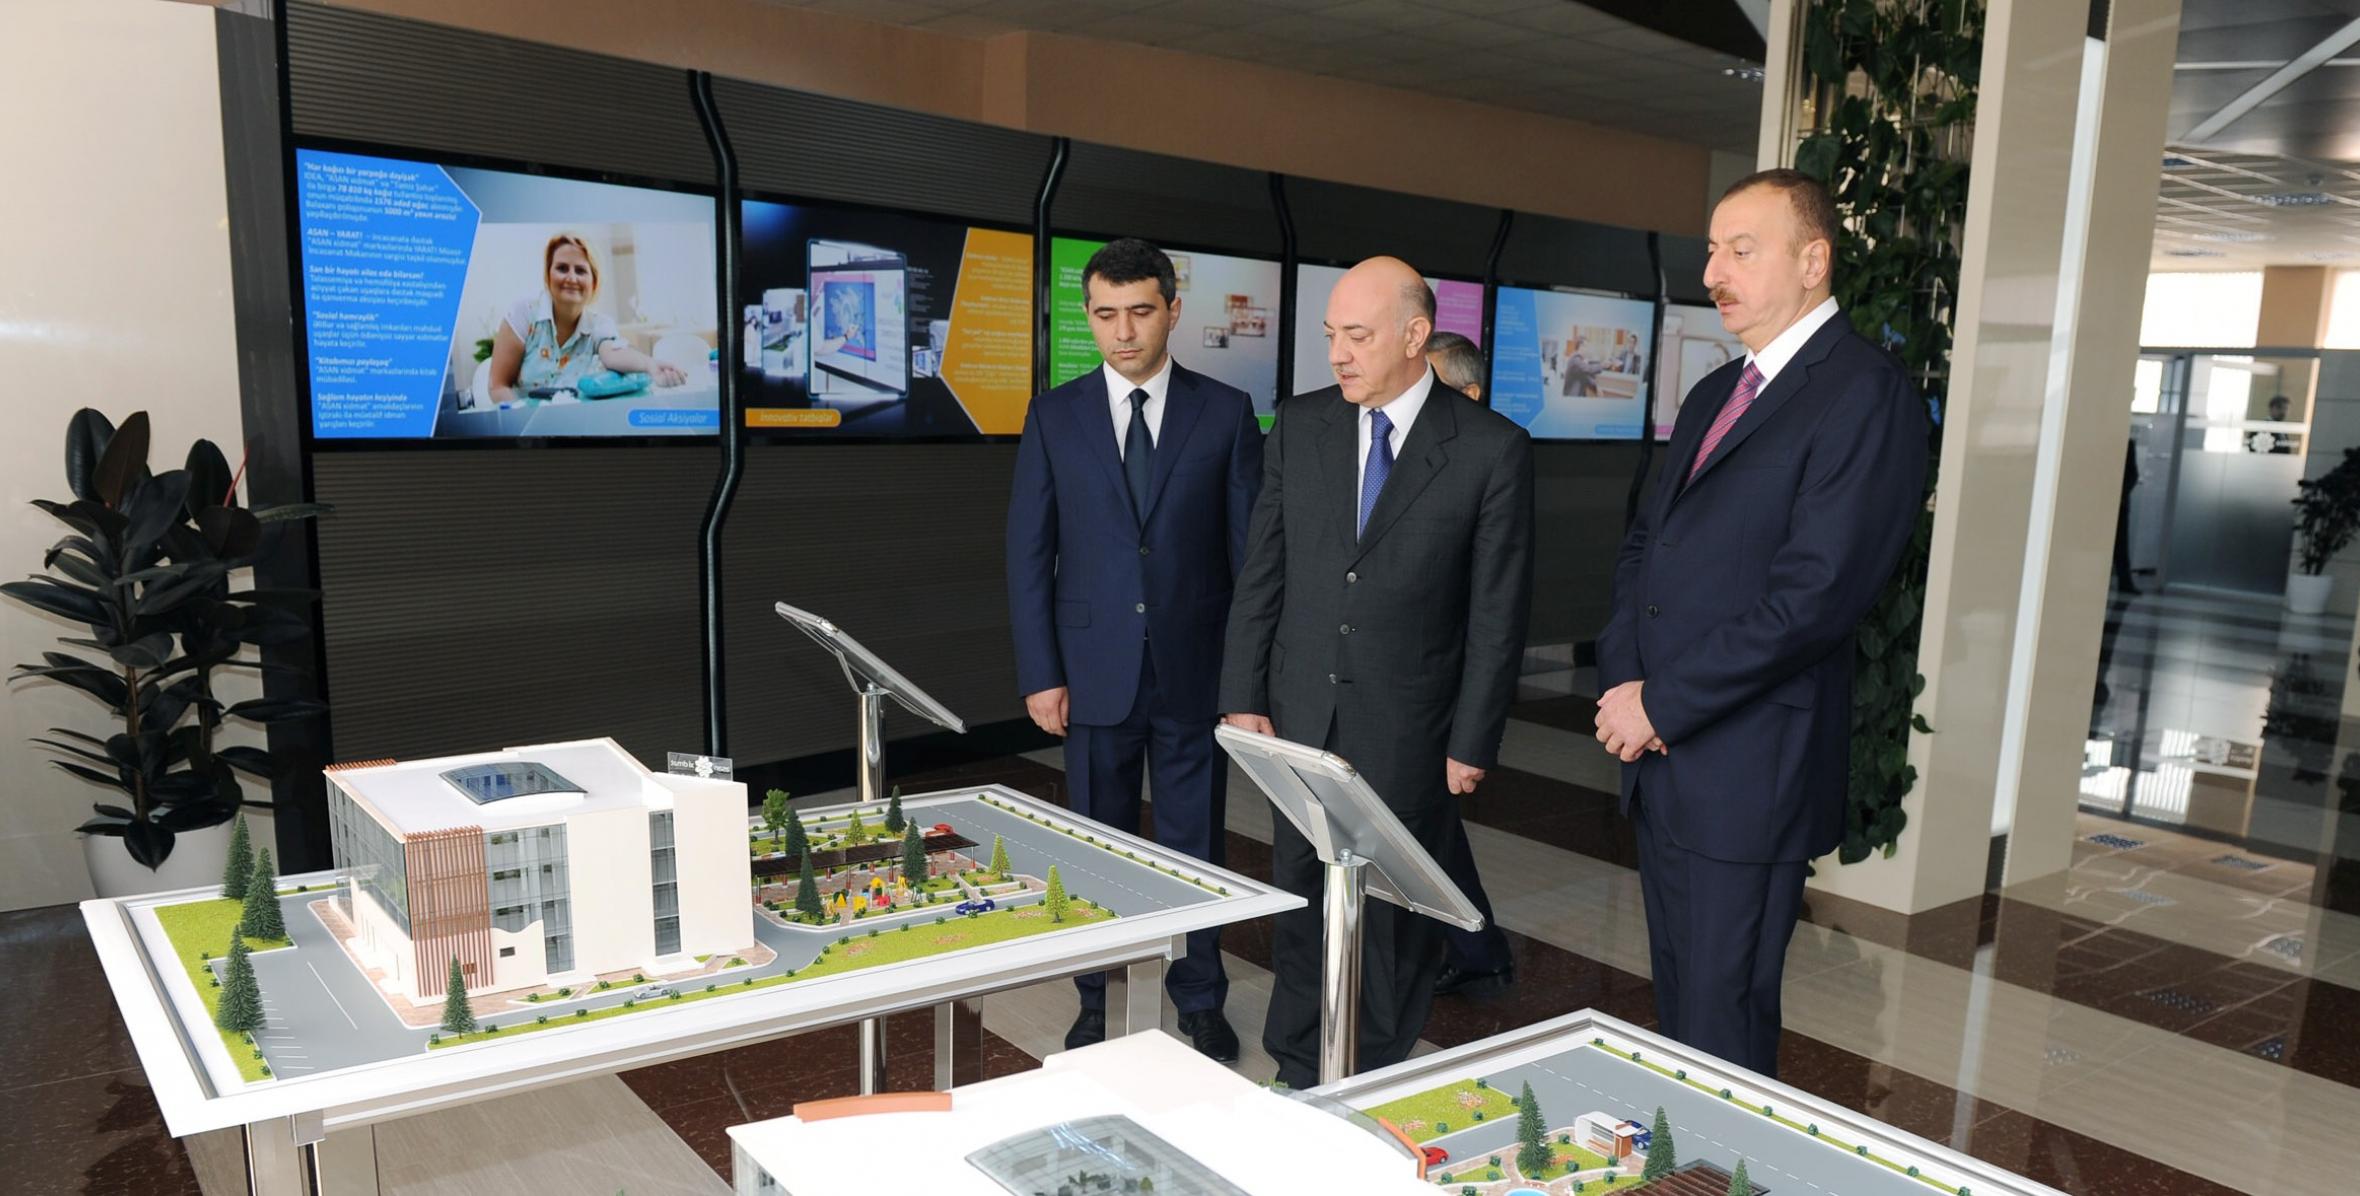 Ilham Aliyev attended the opening of the Baku Center “ASAN Xidmət” No 4 of the State Agency for Public Services and Social Innovation